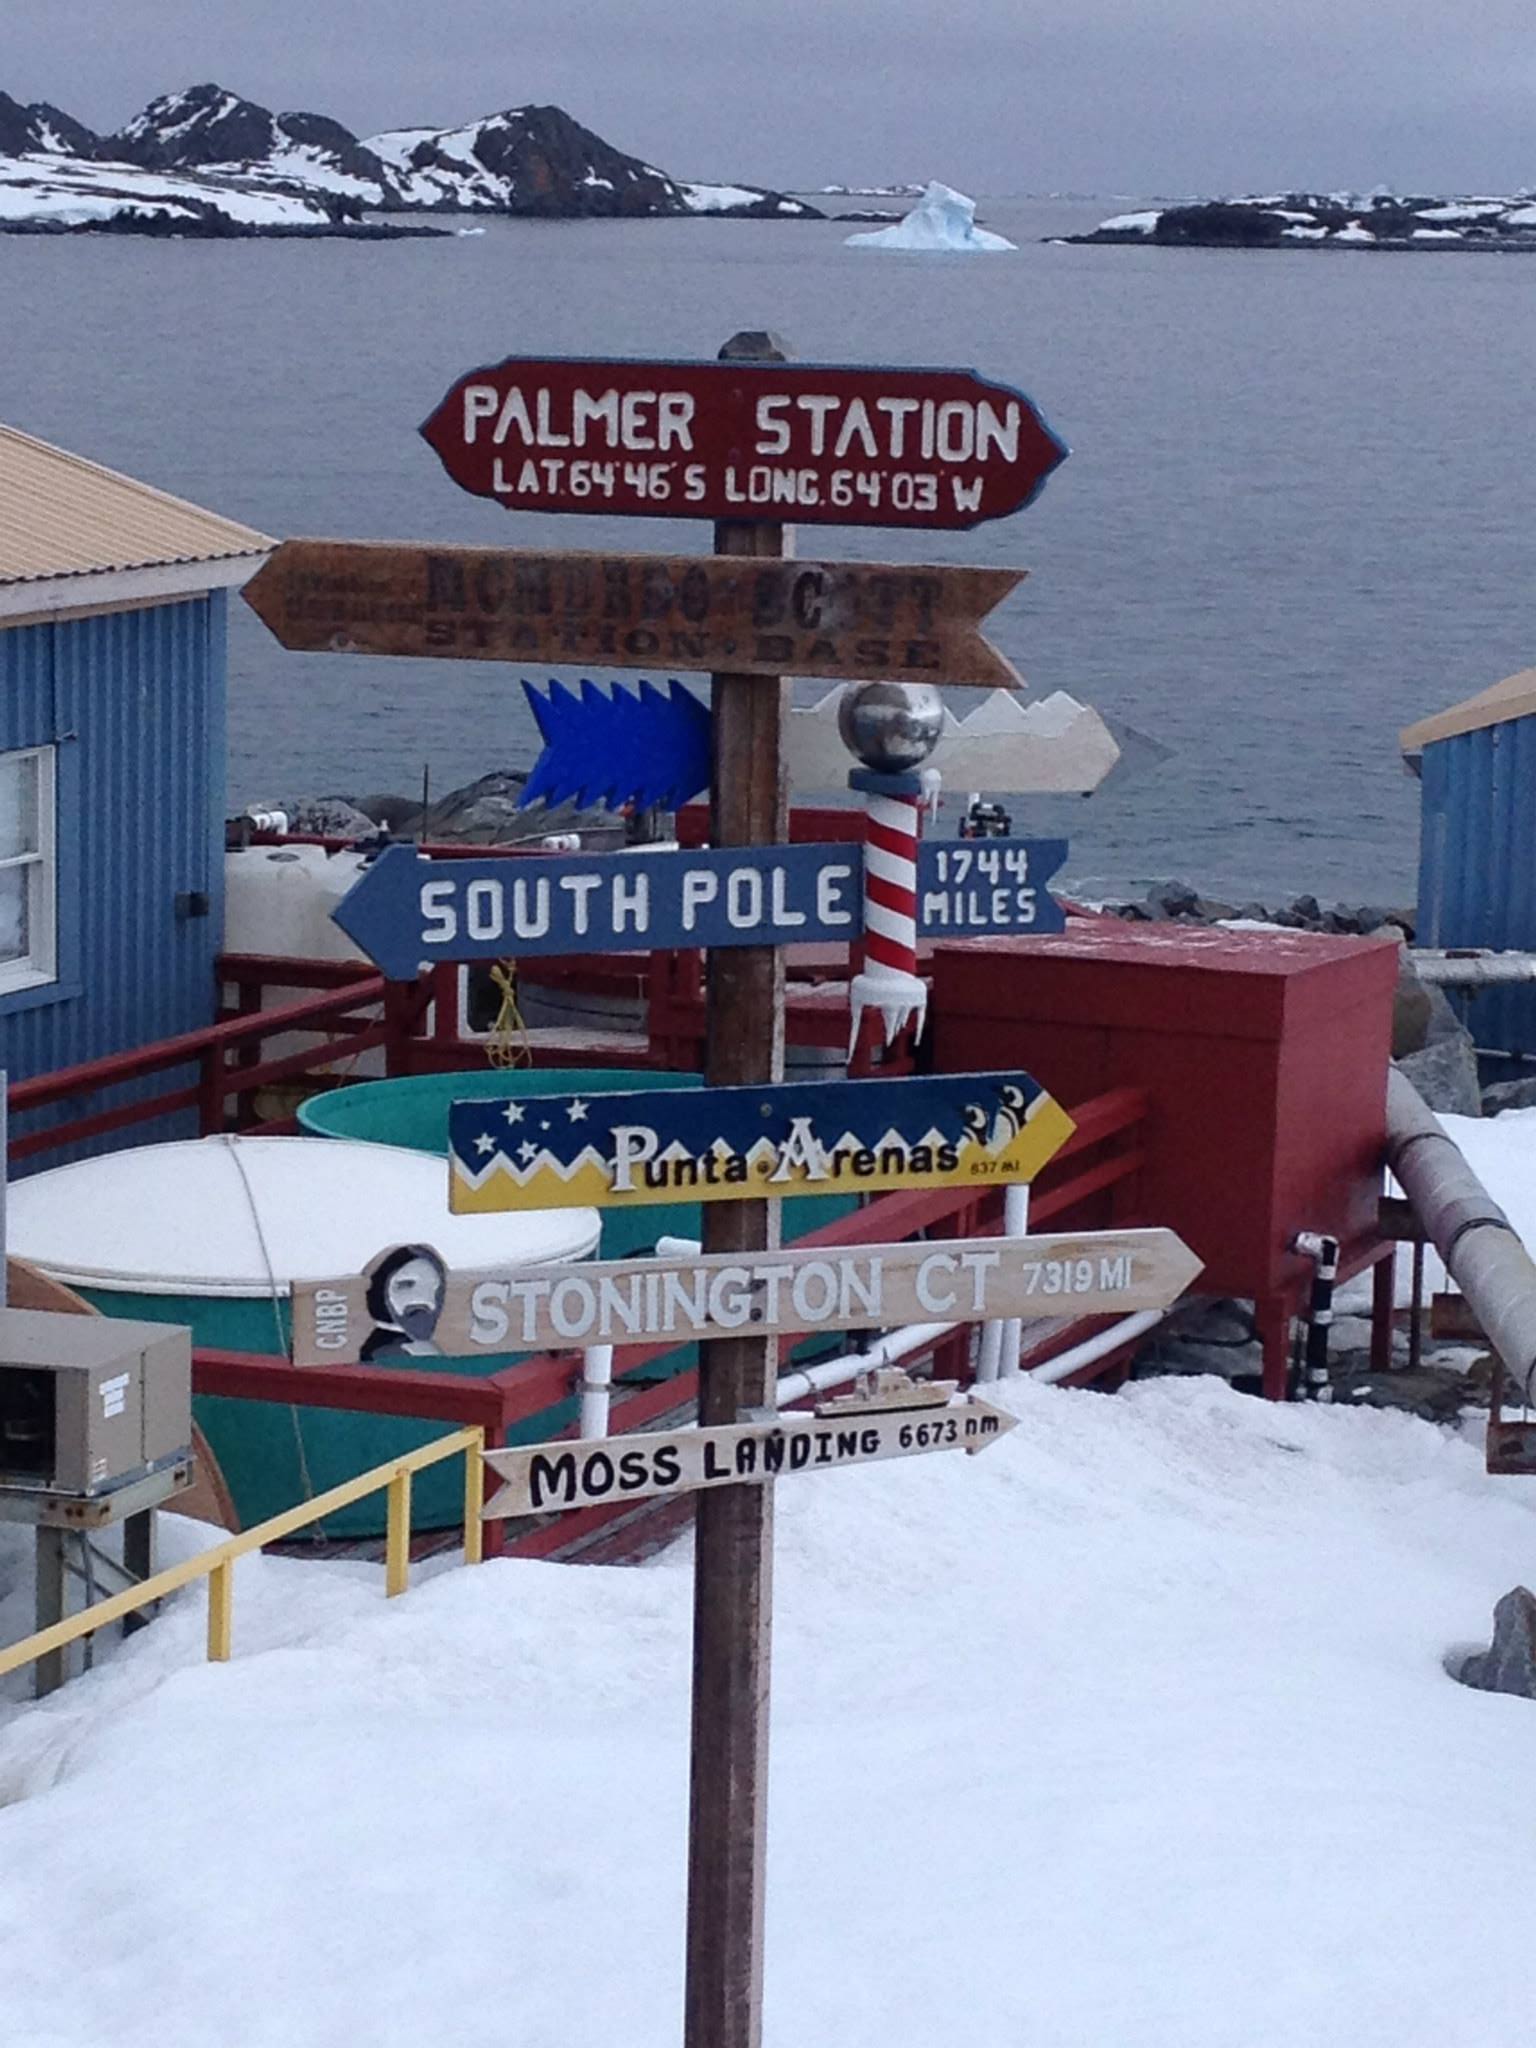 Signs in Antarctica point to different locations on Earth and show how many miles away that location is. For example, the South Pole points to the left of the image and is 1744 miles away. The ground is covered in snow, and icy terrain rises from the sea in the background.